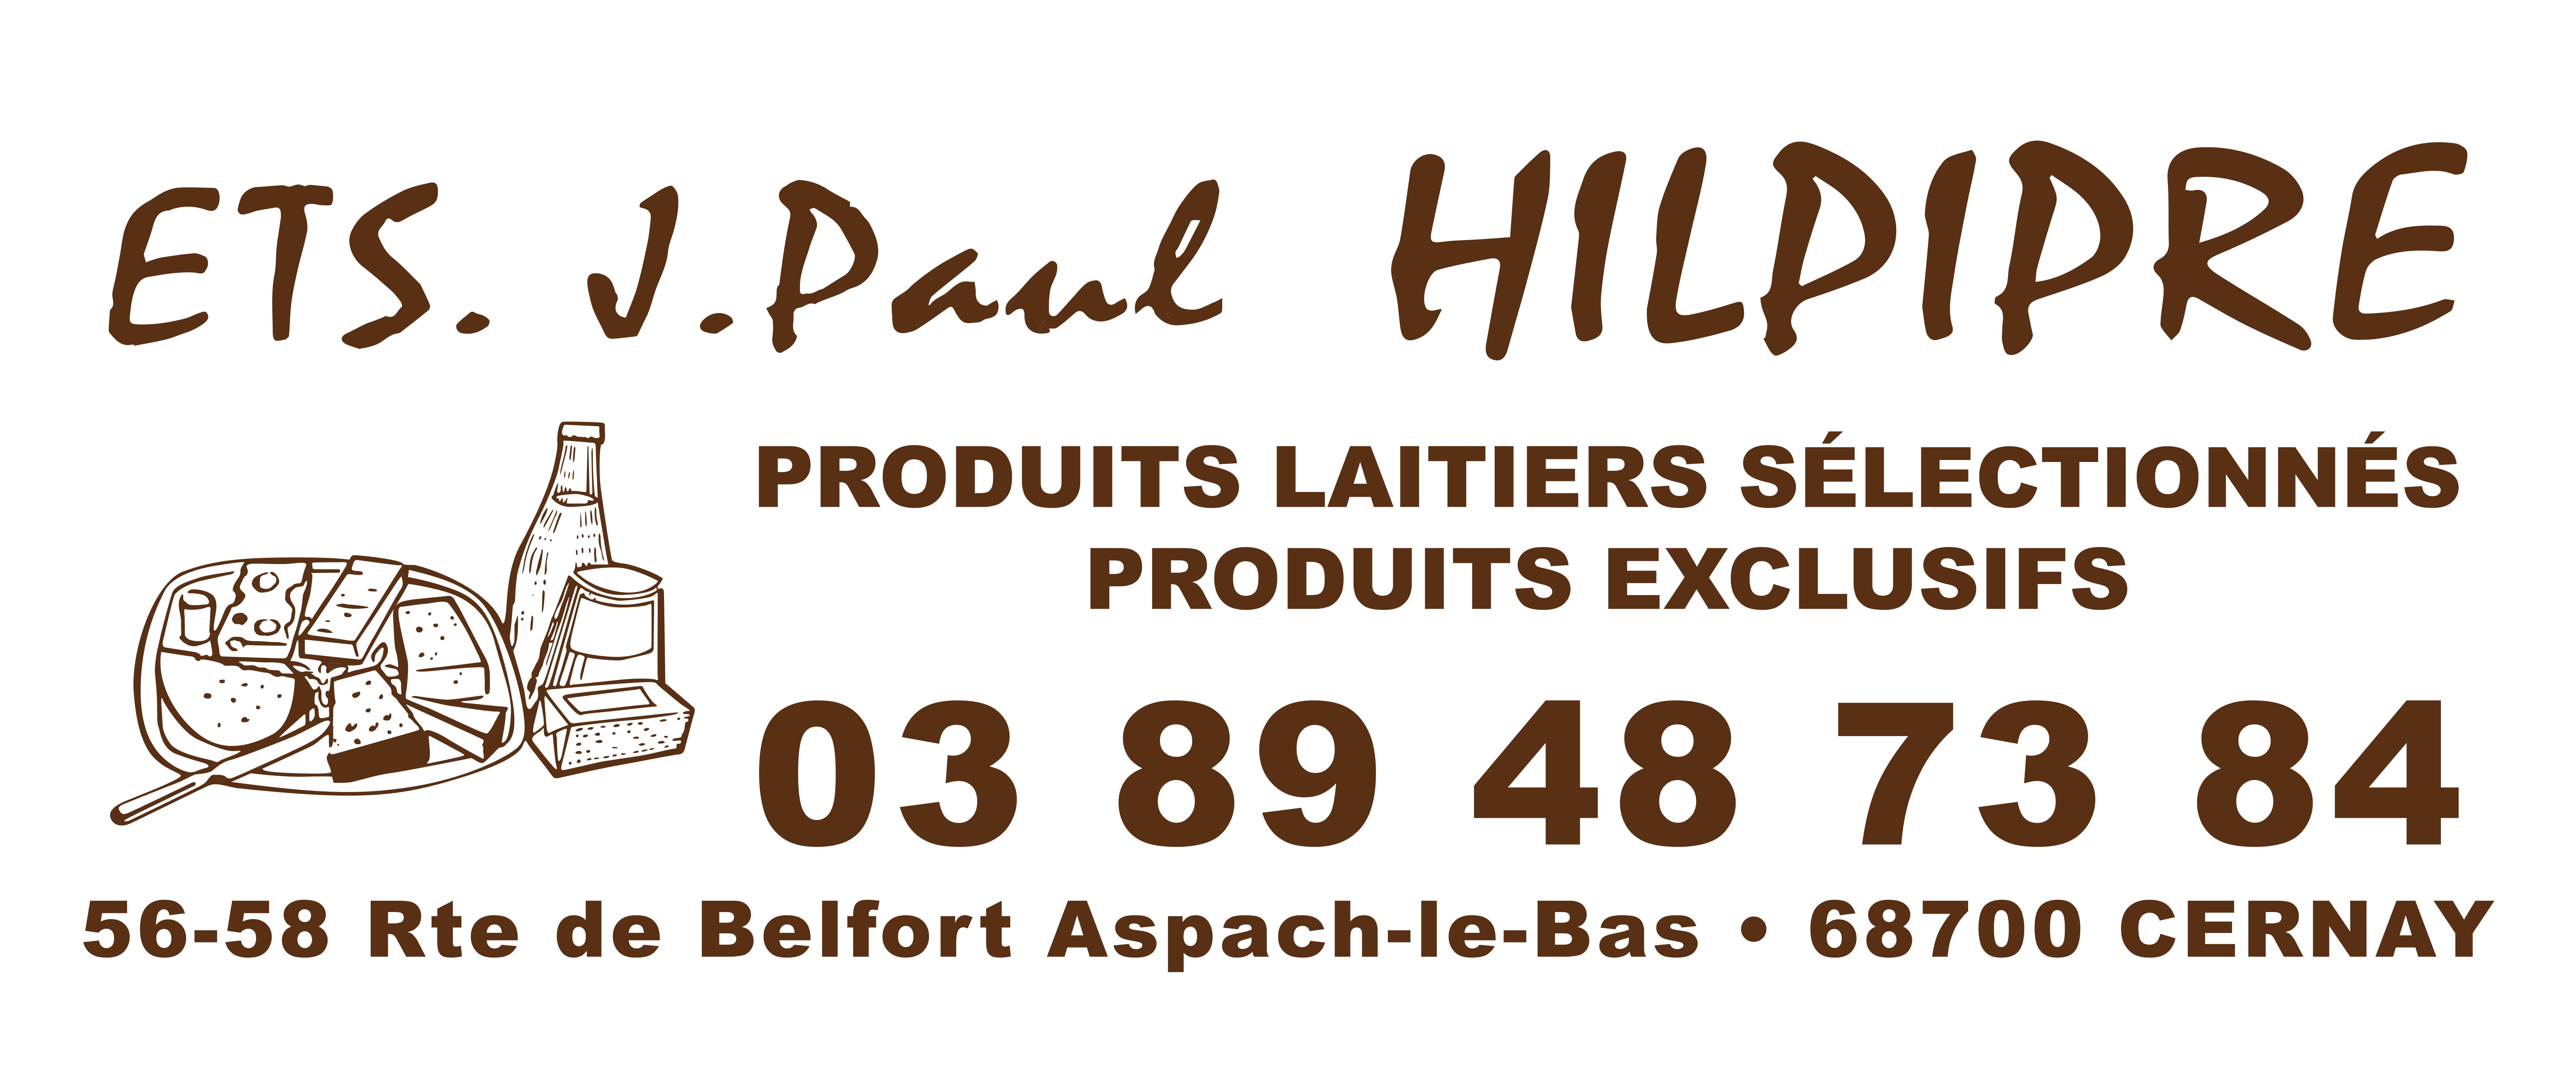 logo fromagerie hilpipre